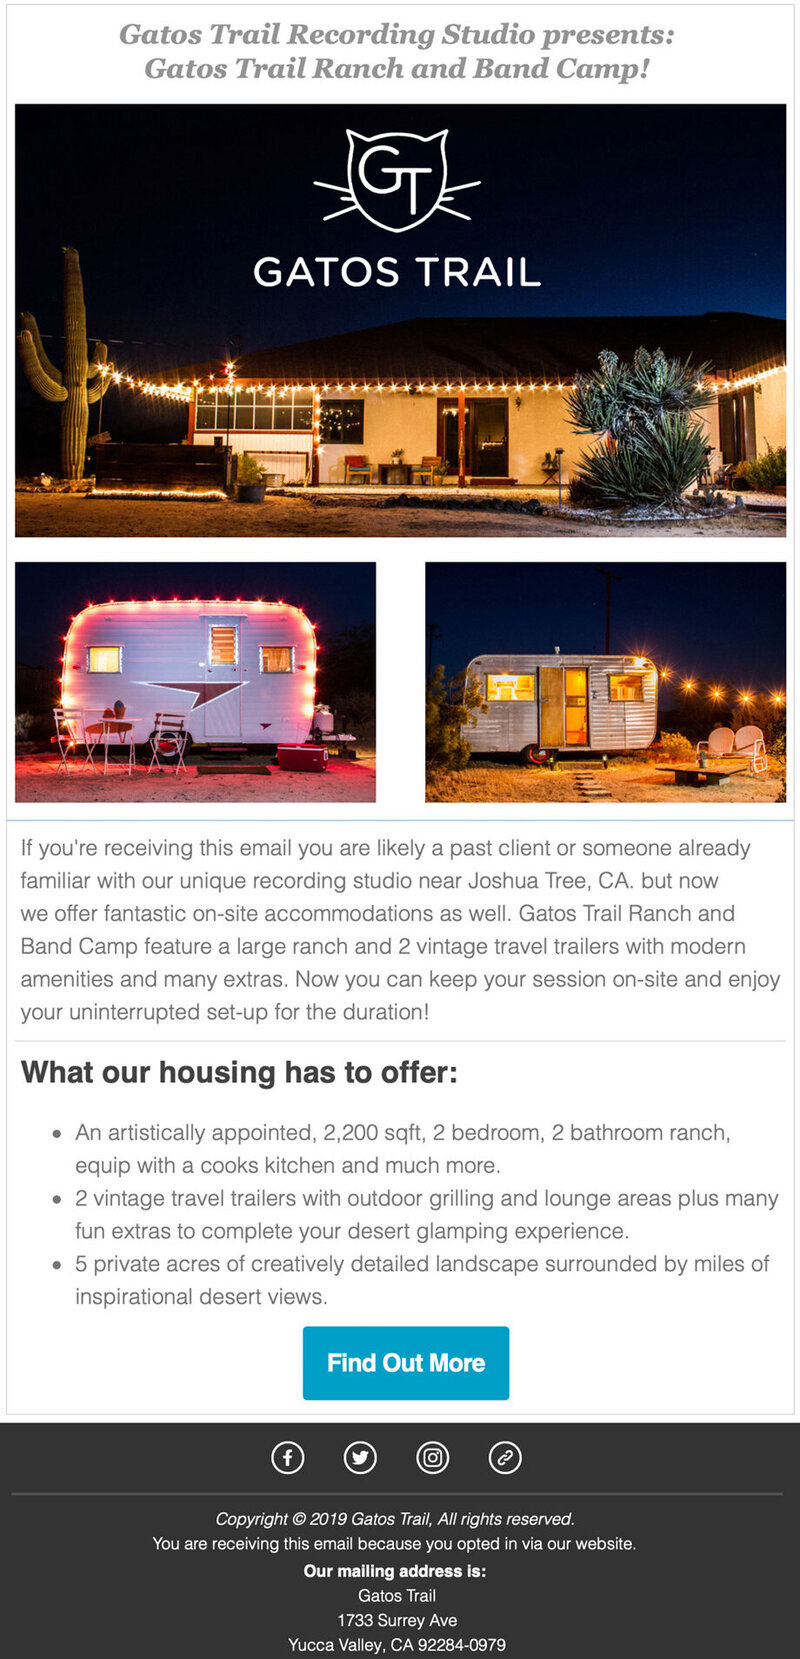 Gatos Trail promotional email with photos of house trailers above text info